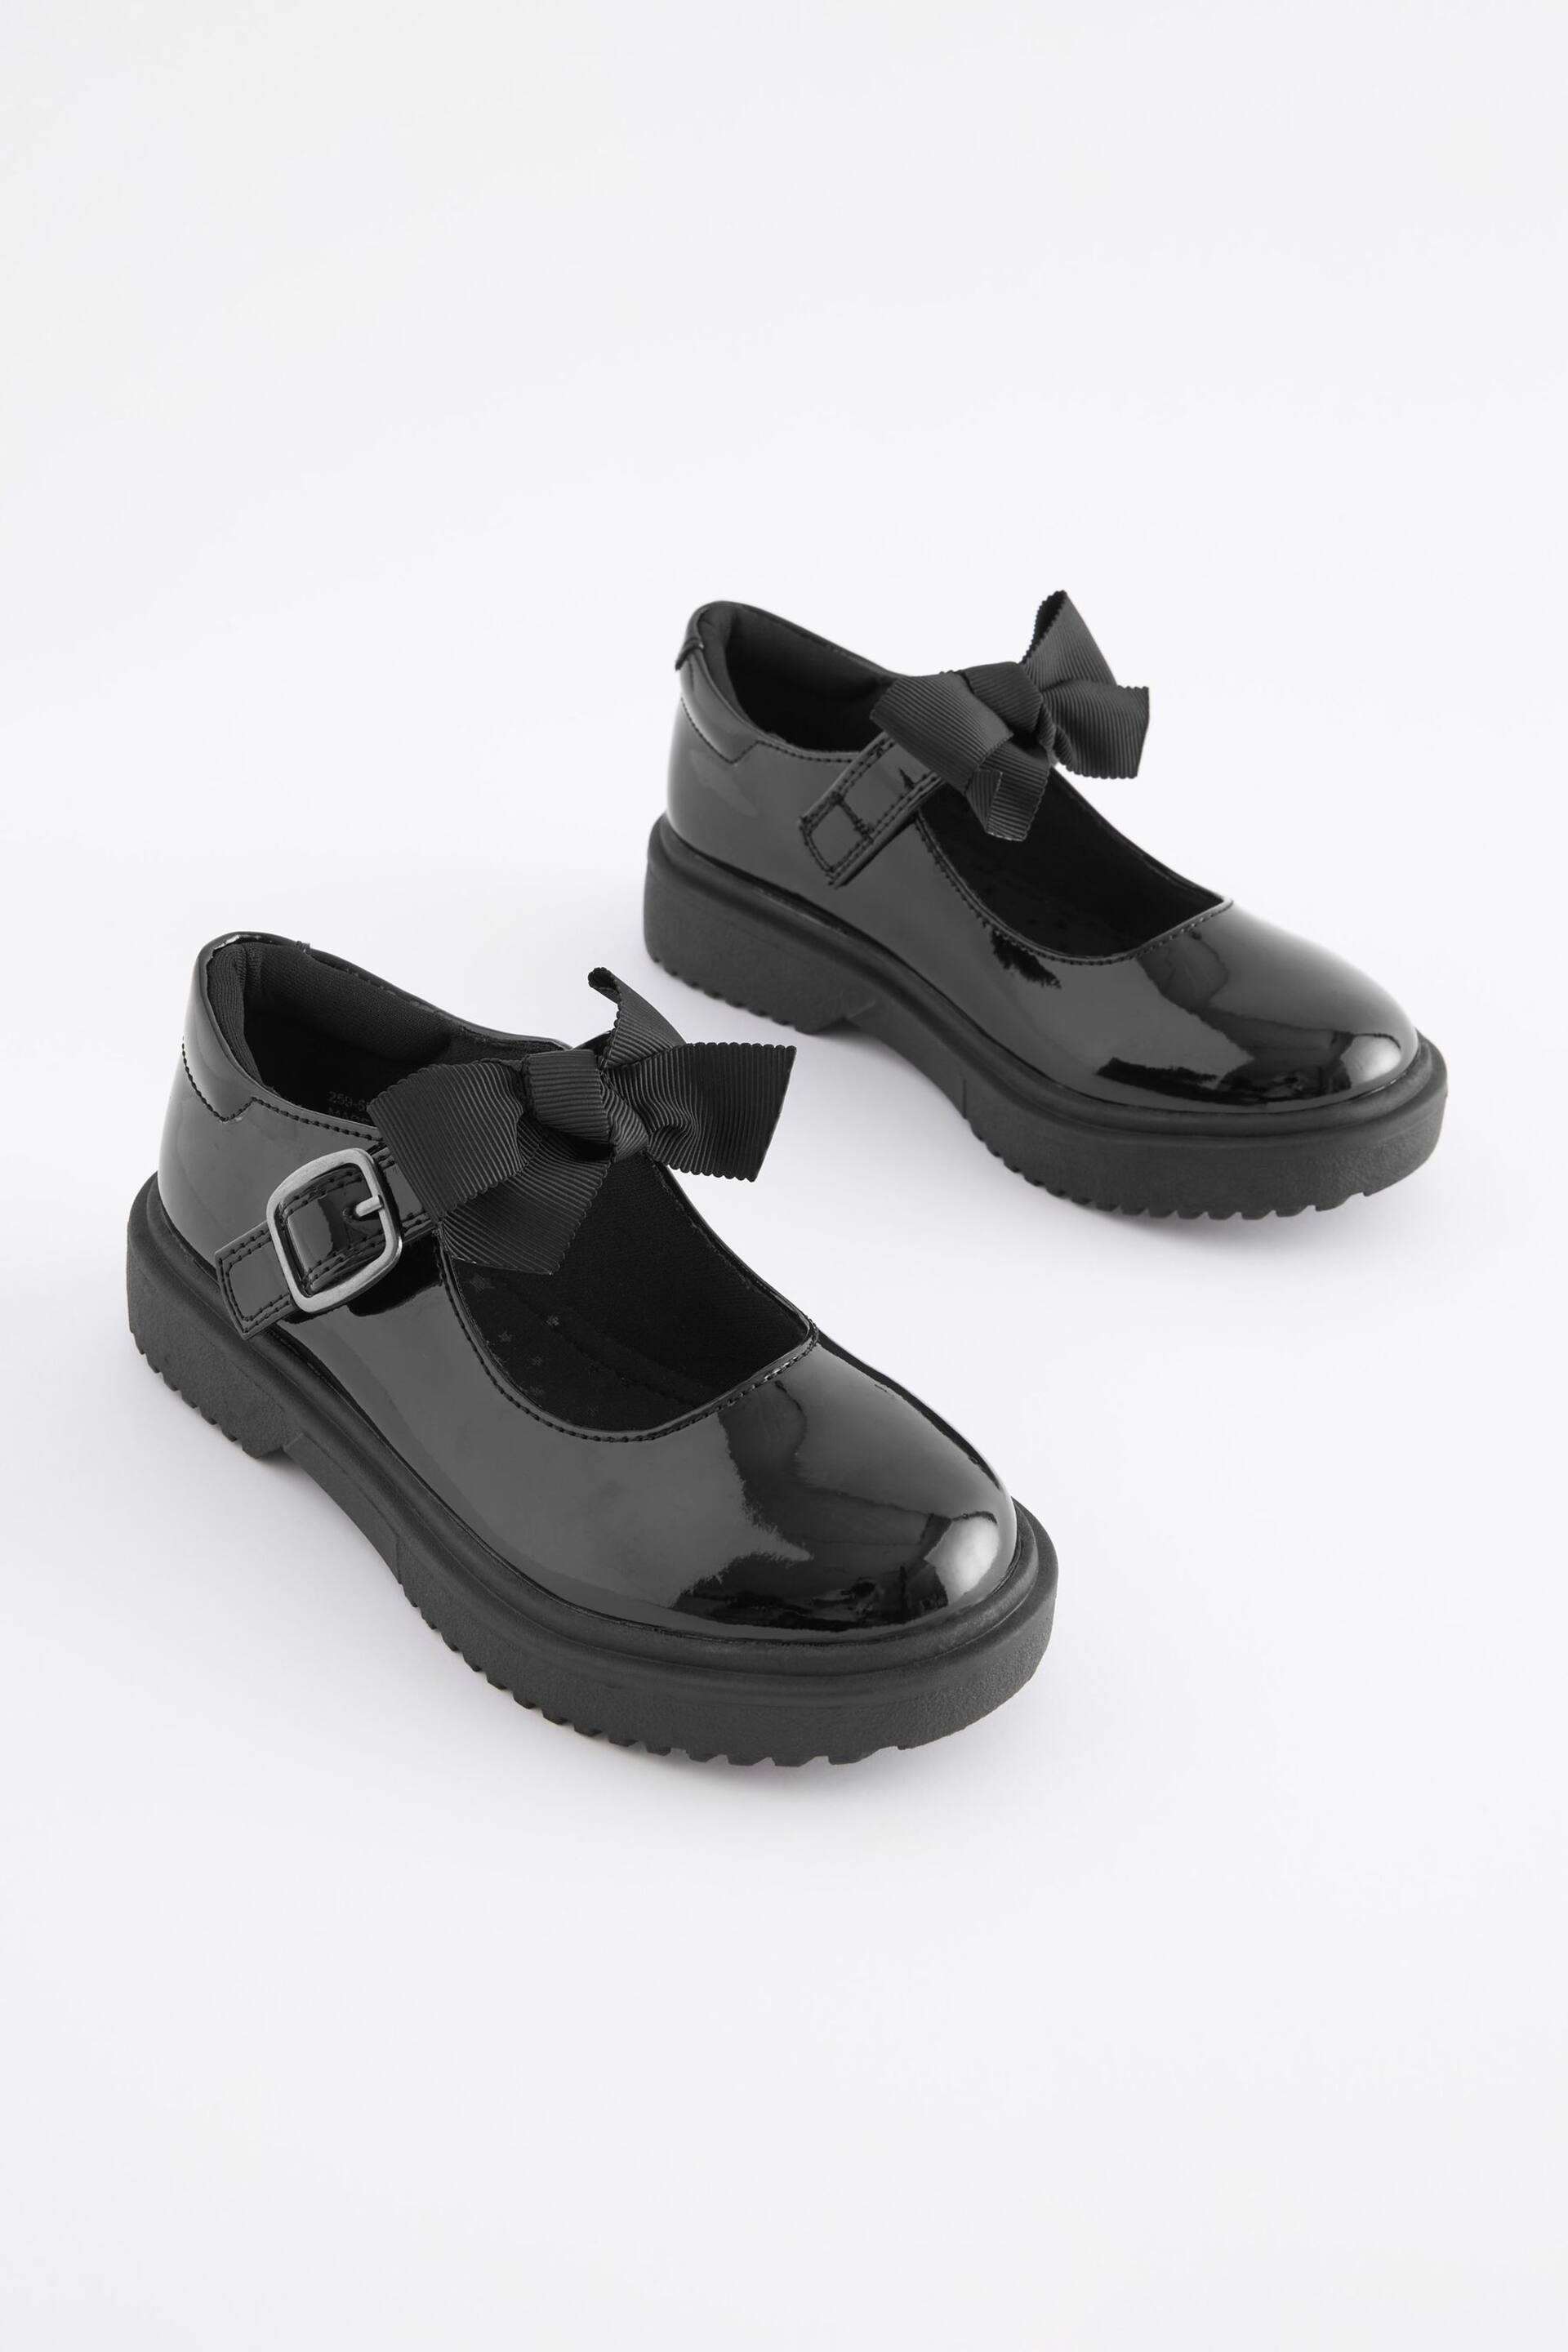 Black Patent Standard Fit (F) Bow Chunky Mary Jane School Shoes - Image 2 of 6